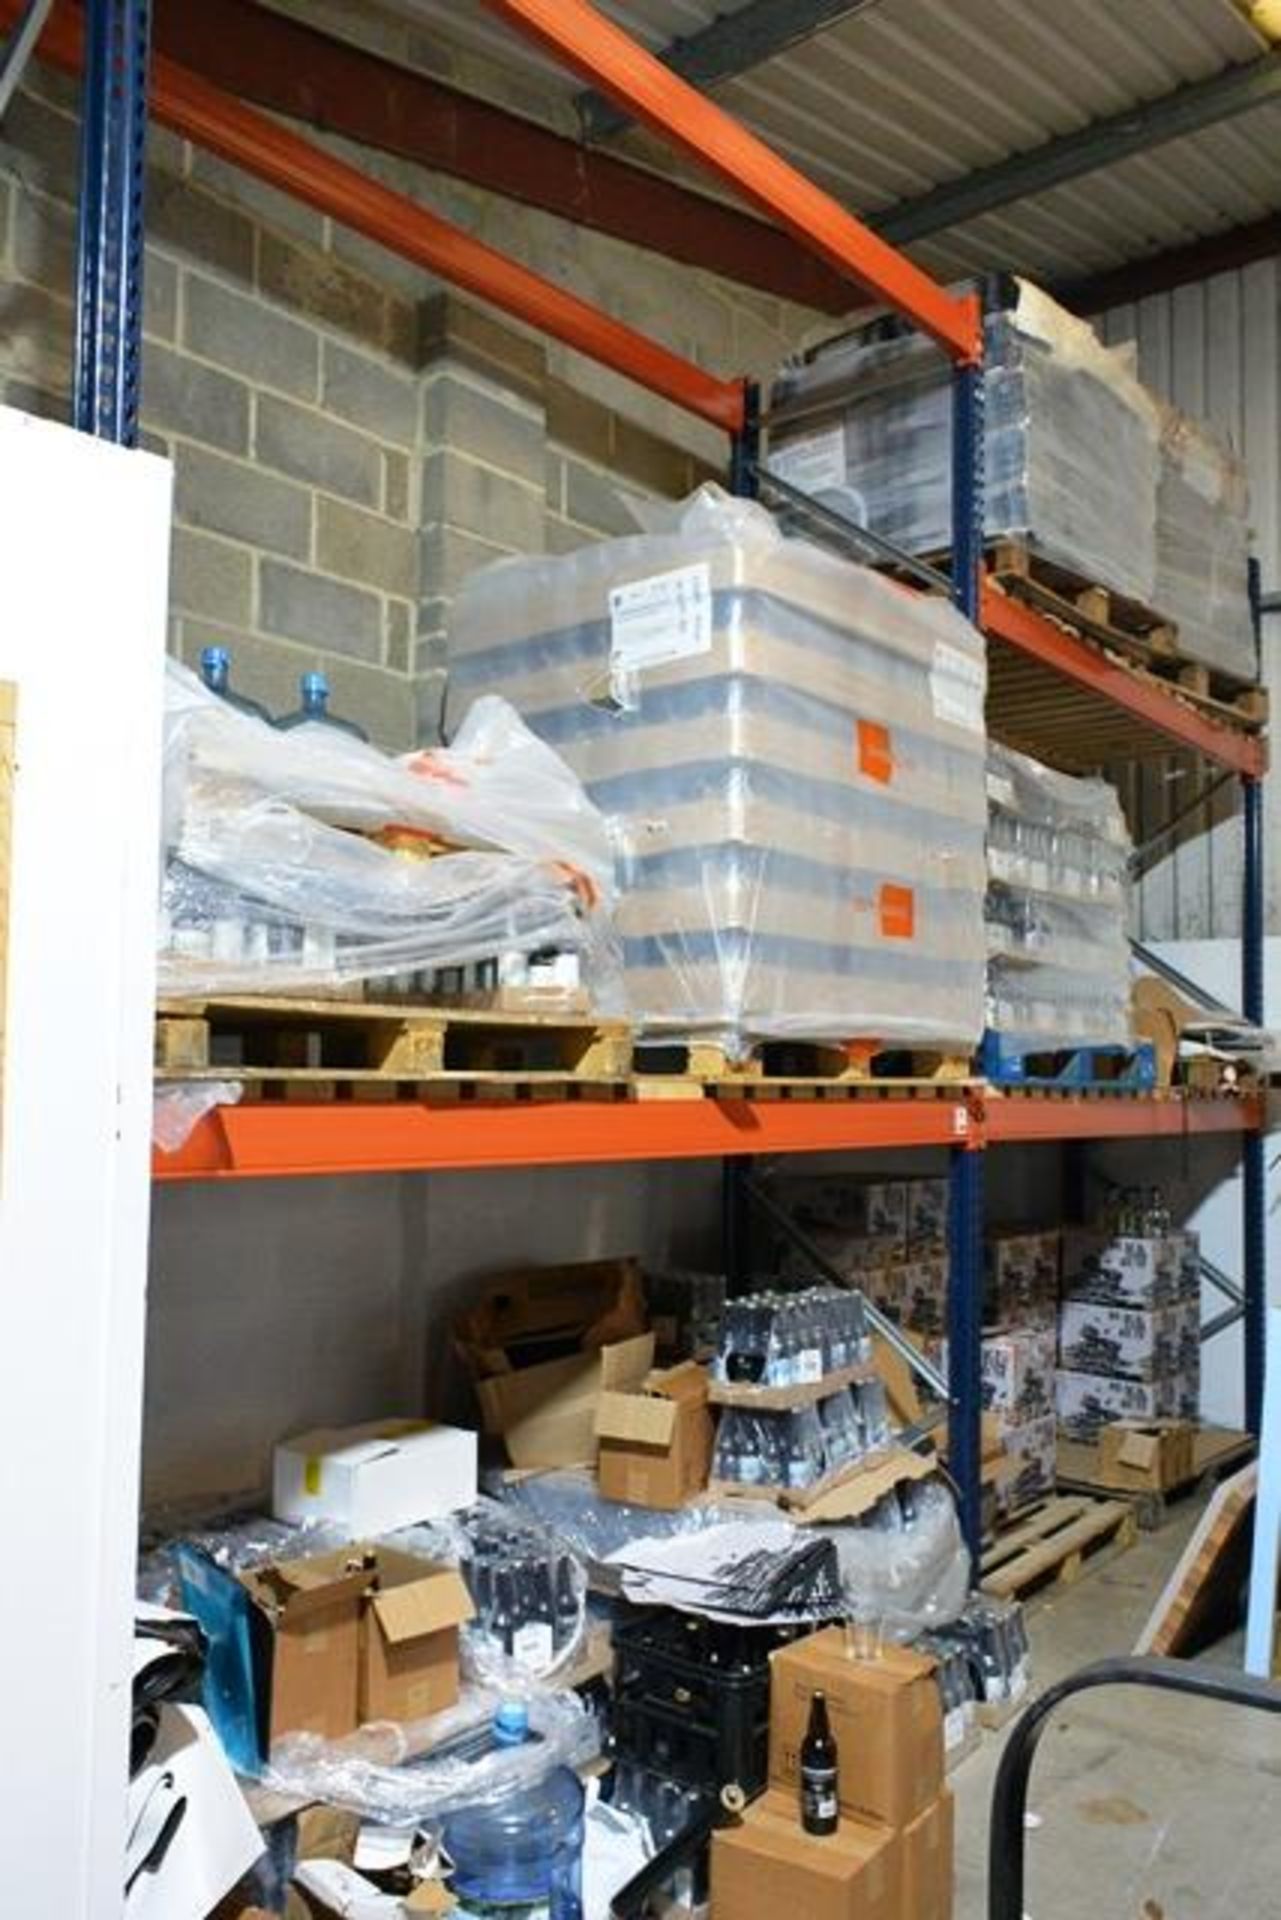 Two bays of adjustable boltless pallet racking, approx bay width 2800mm, approx bay height 4000mm (